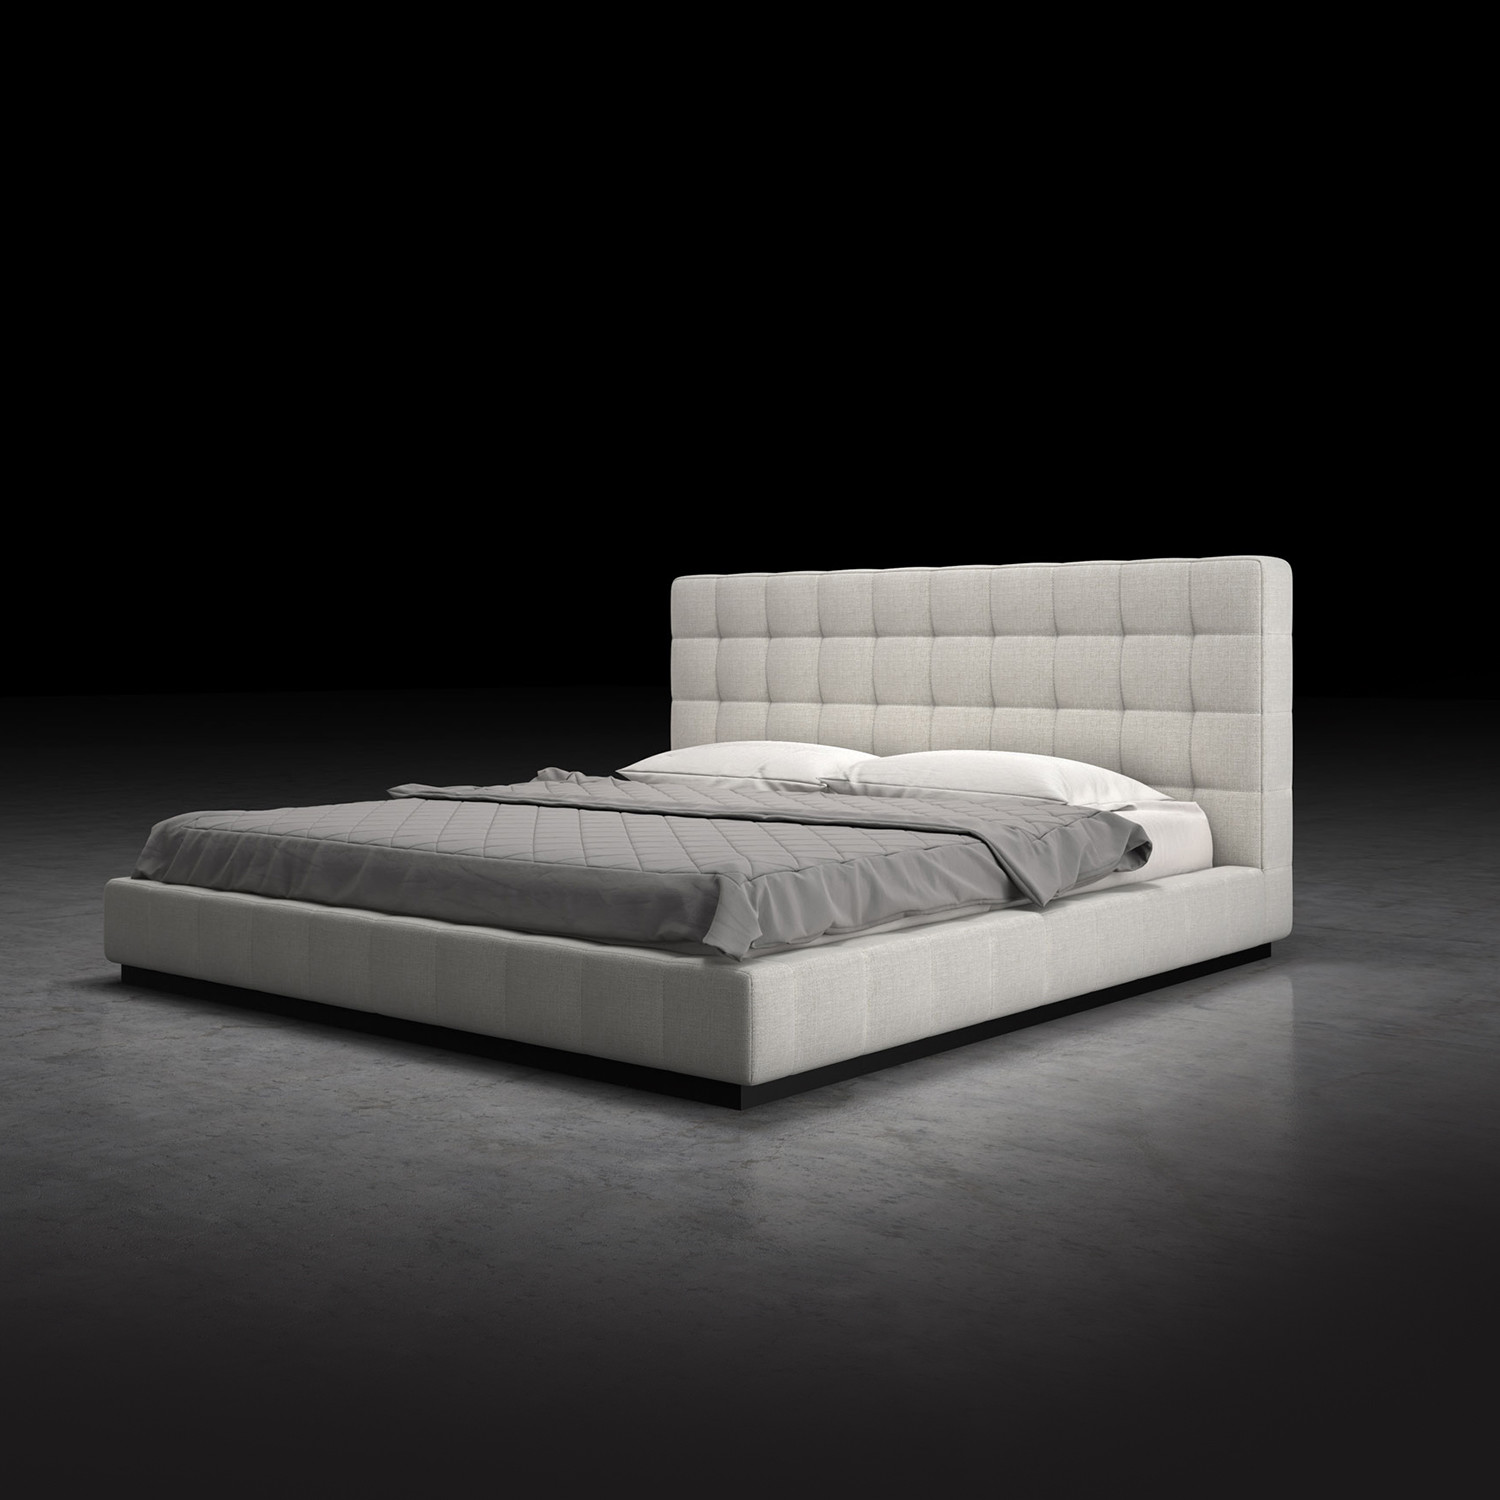 Thompson Bed Moonbeam Twin, Thompson King Bed